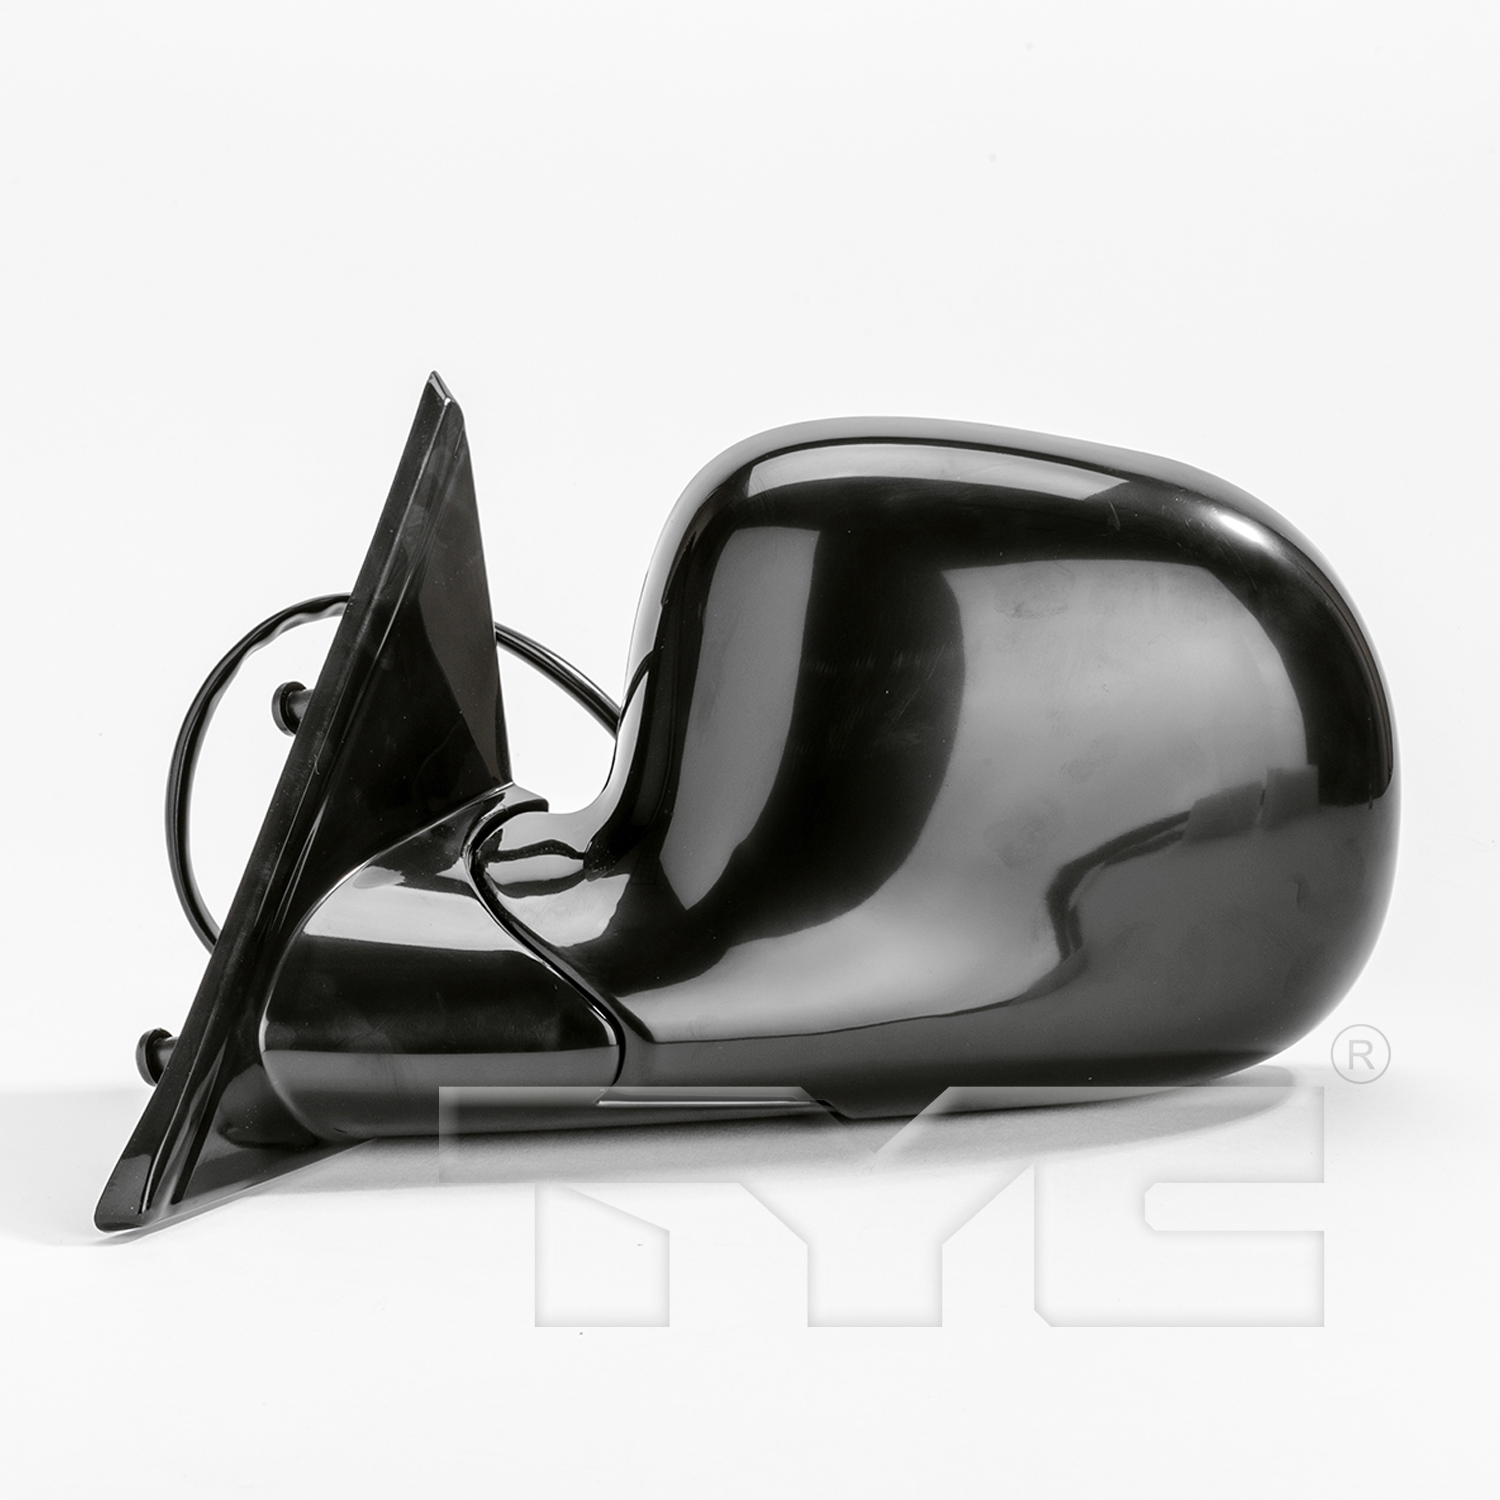 Aftermarket MIRRORS for GMC - JIMMY, JIMMY,98-98,LT Mirror outside rear view